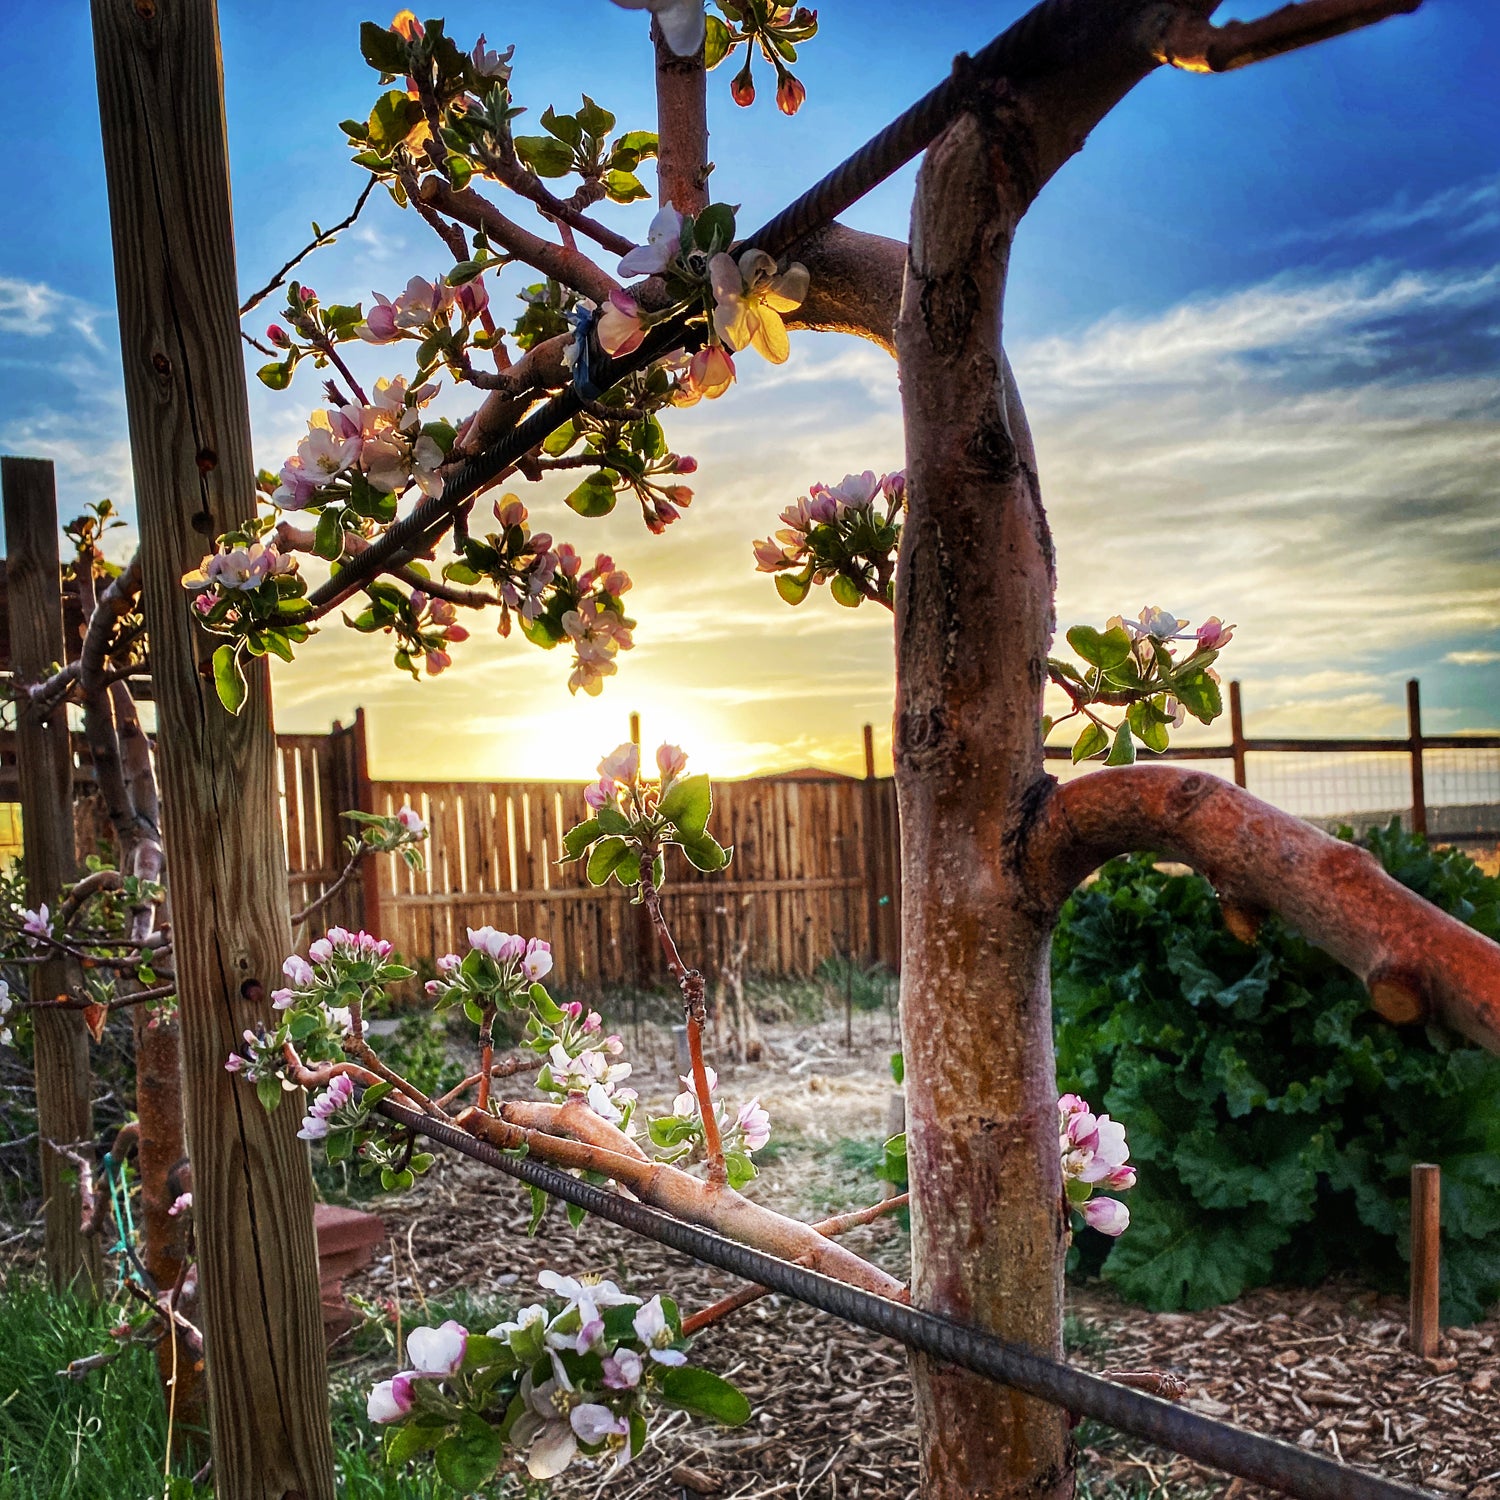 Breathtaking image of an apple tree in full blossom, bathed in the glow of a perfect sunset at Sacred Plant Co, part of our Low Water Colorado Mountain Herb Farm